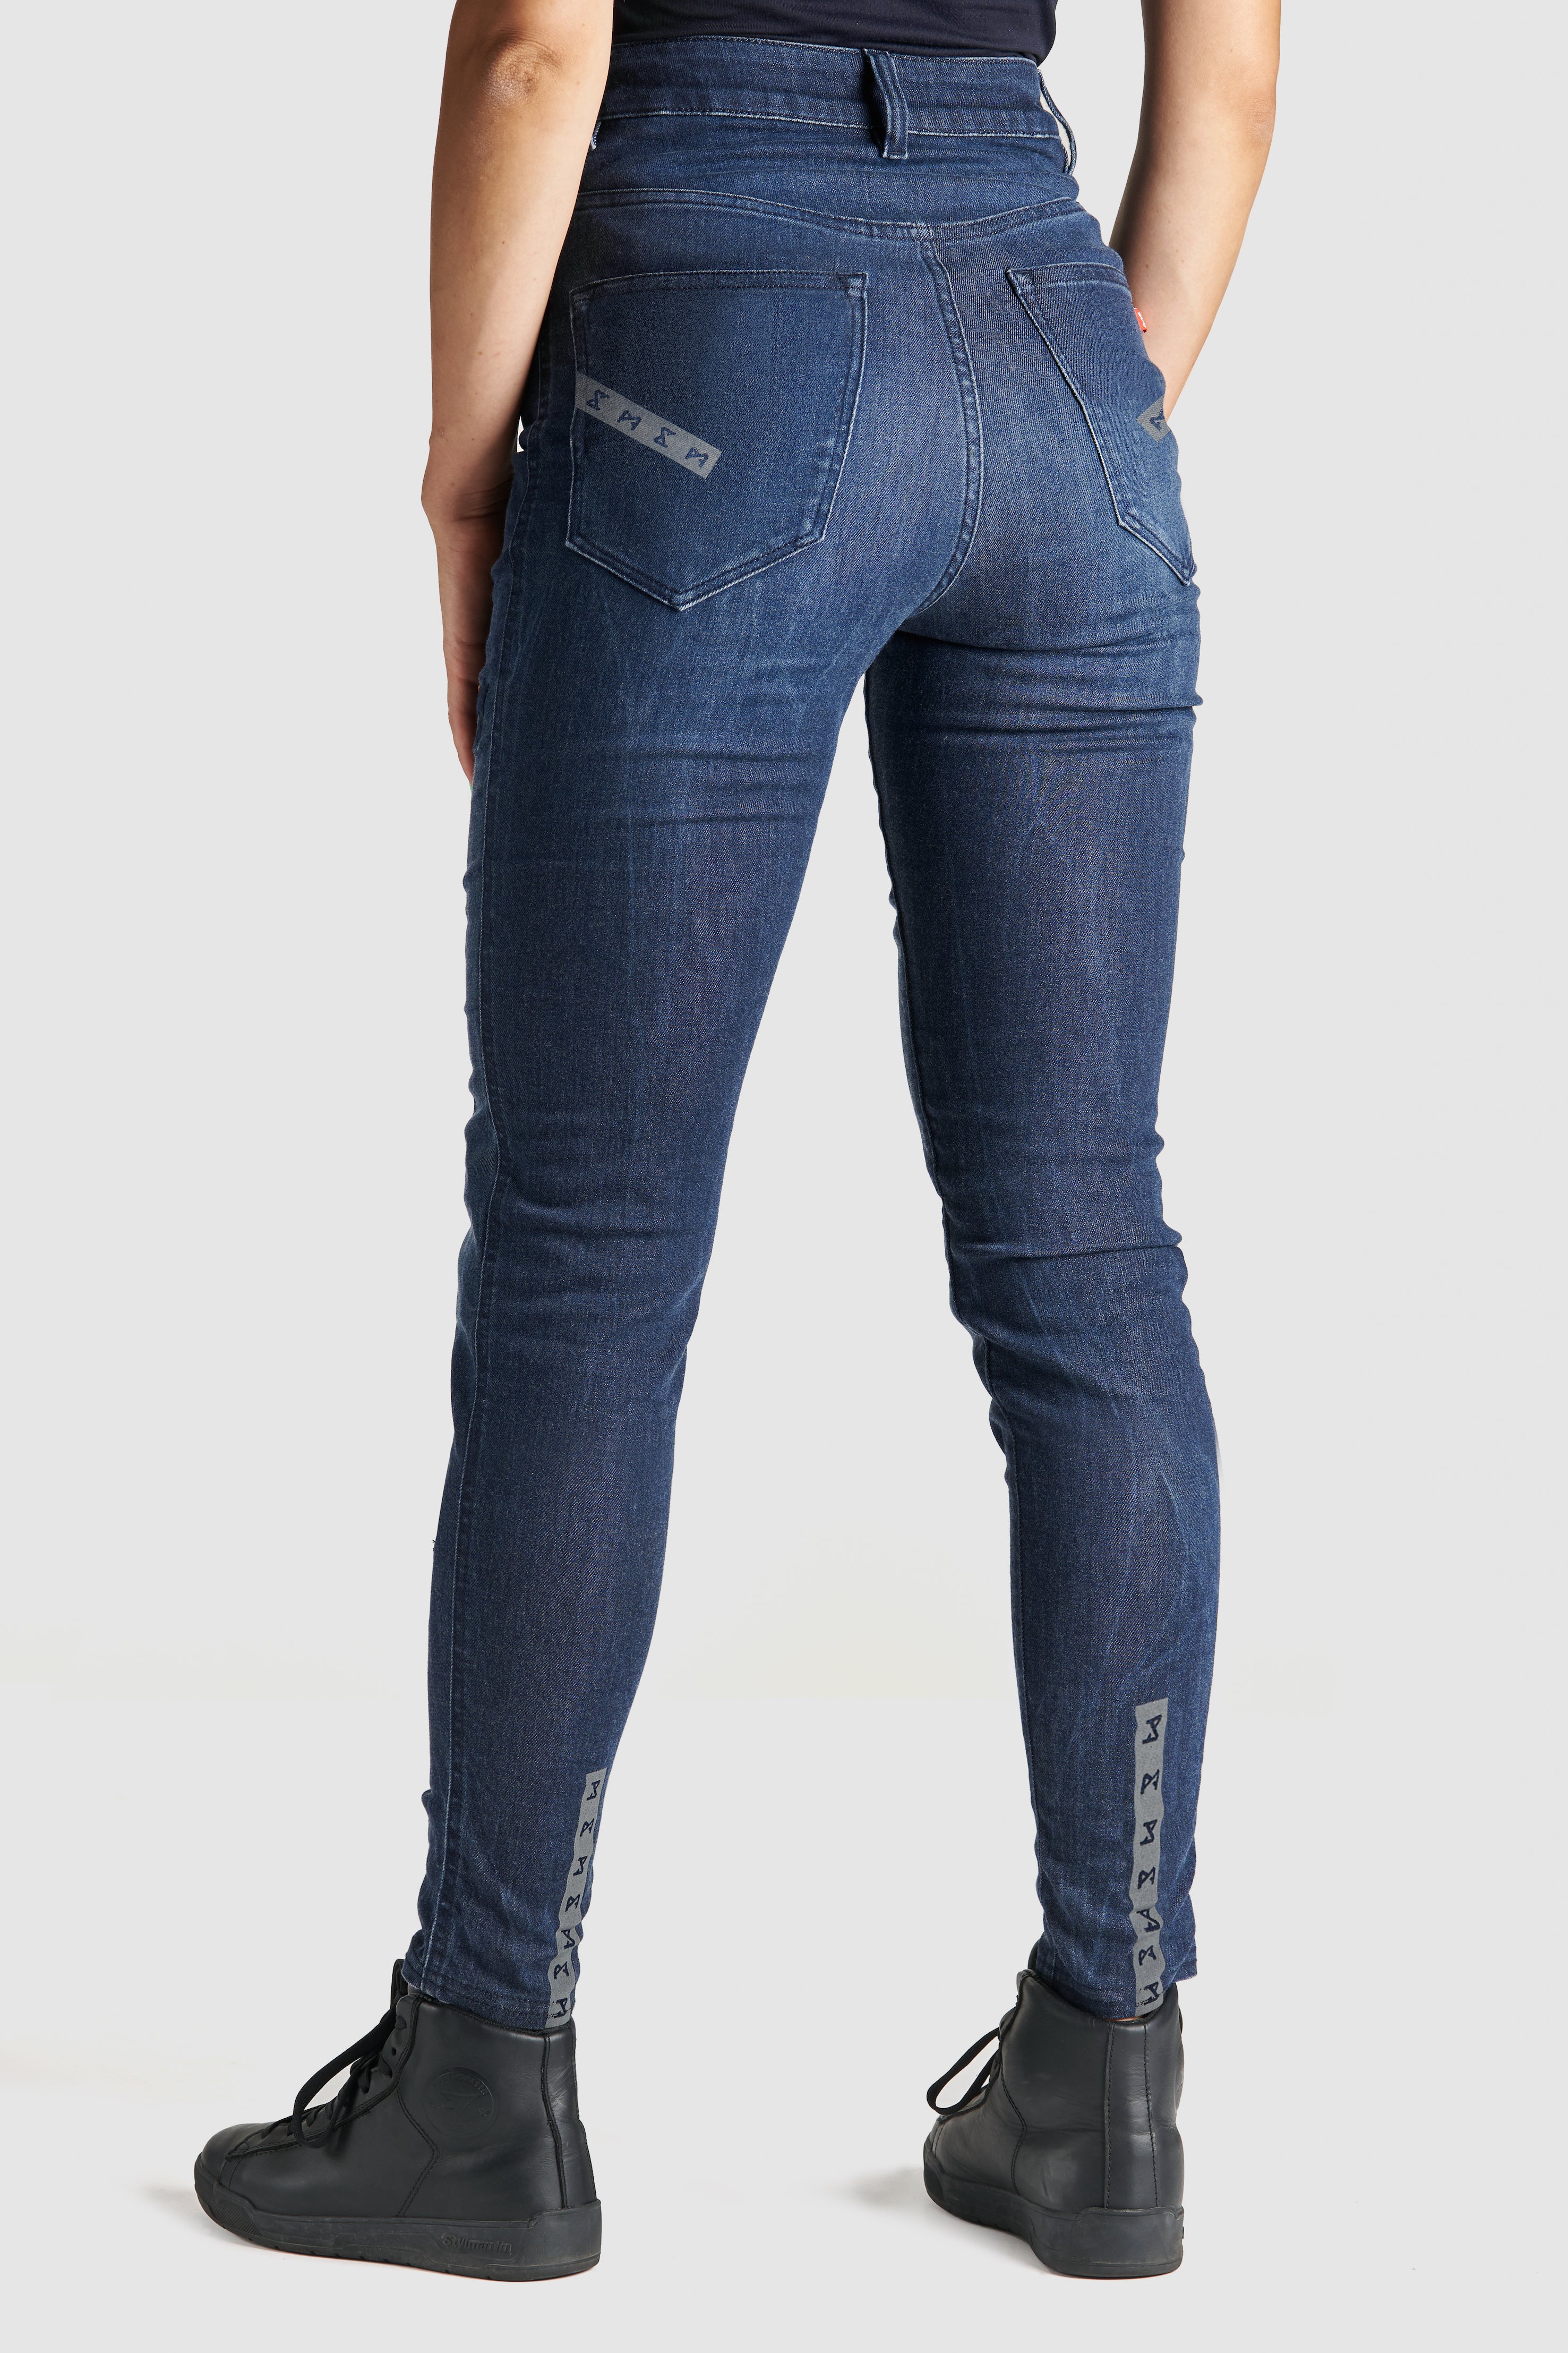 Woman&#39;s legs from the back wearing blue motorcycle jeans 